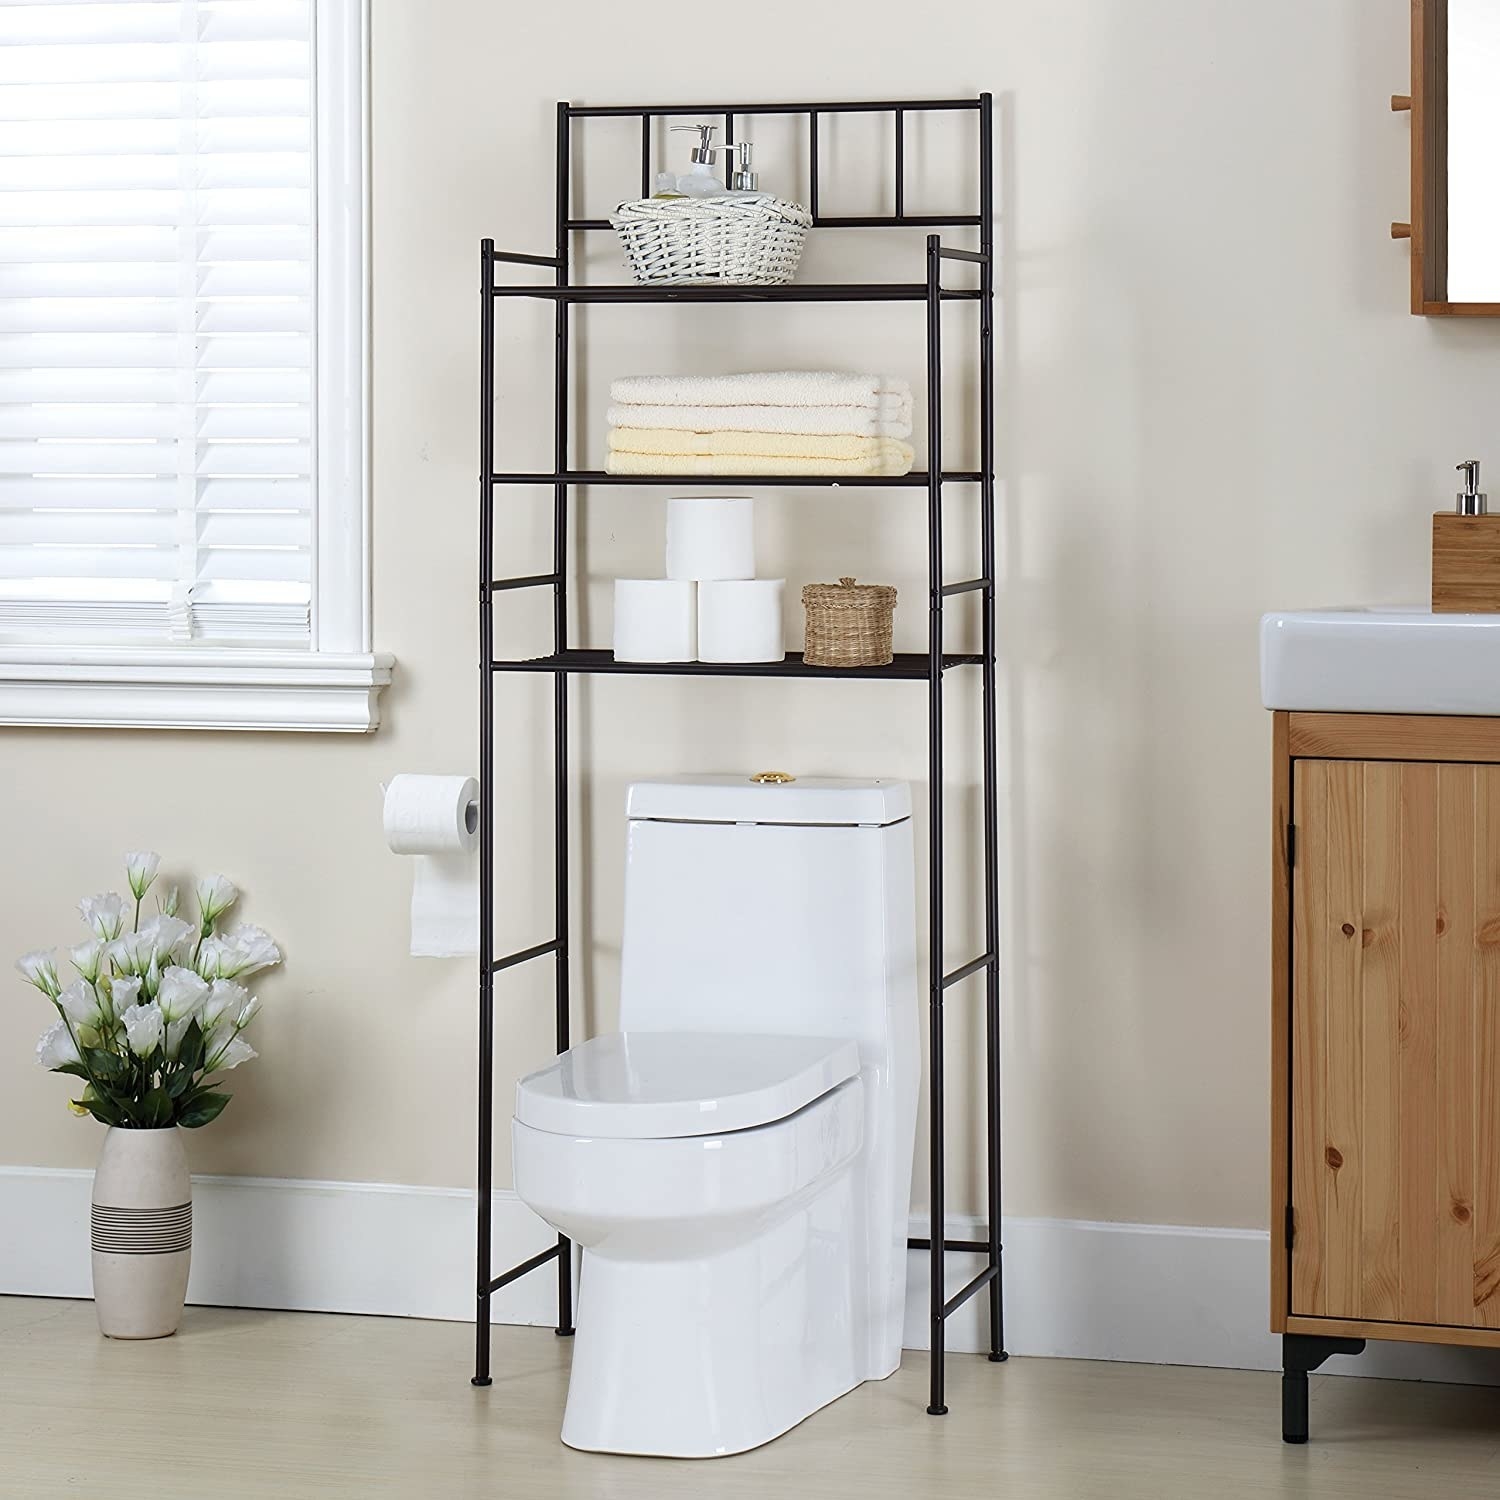 A minimalist shelving unit made of thin black pipes. It has three shelves that are high enough to go above the toilet tank. 